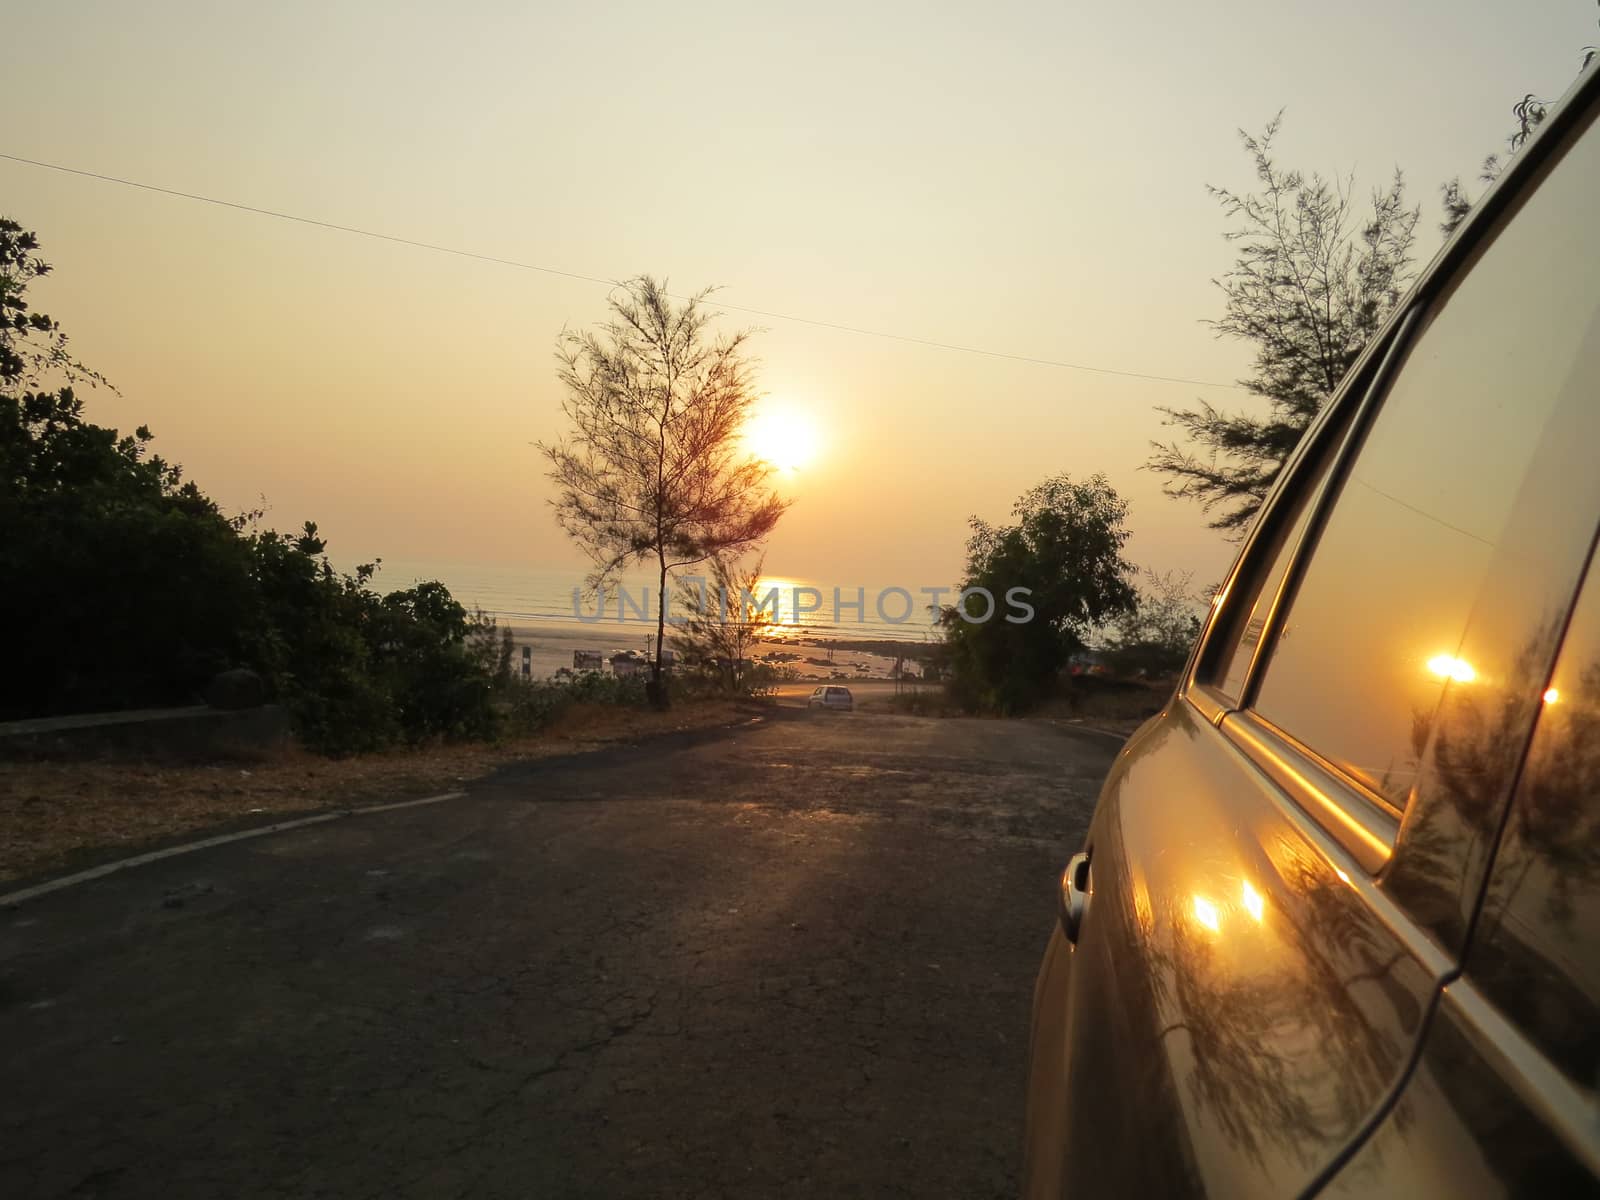 The reflection of the setting sun over a beach on the windows of a car.